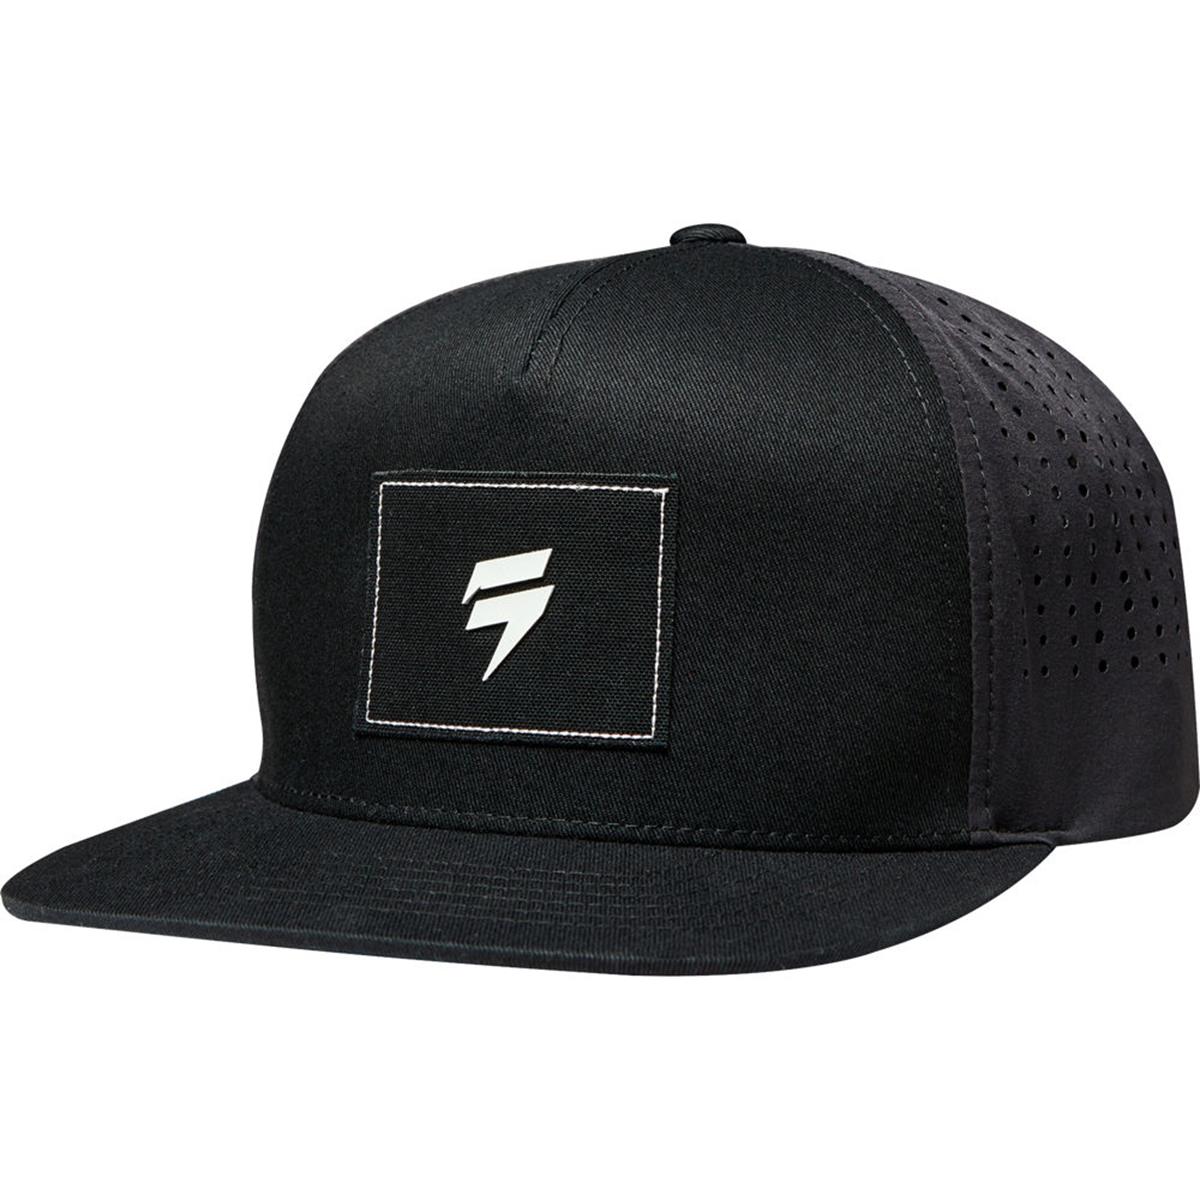 Shift Cappellino Snap Back 3LUE Label Iceland Black/Grey - Limited Edition